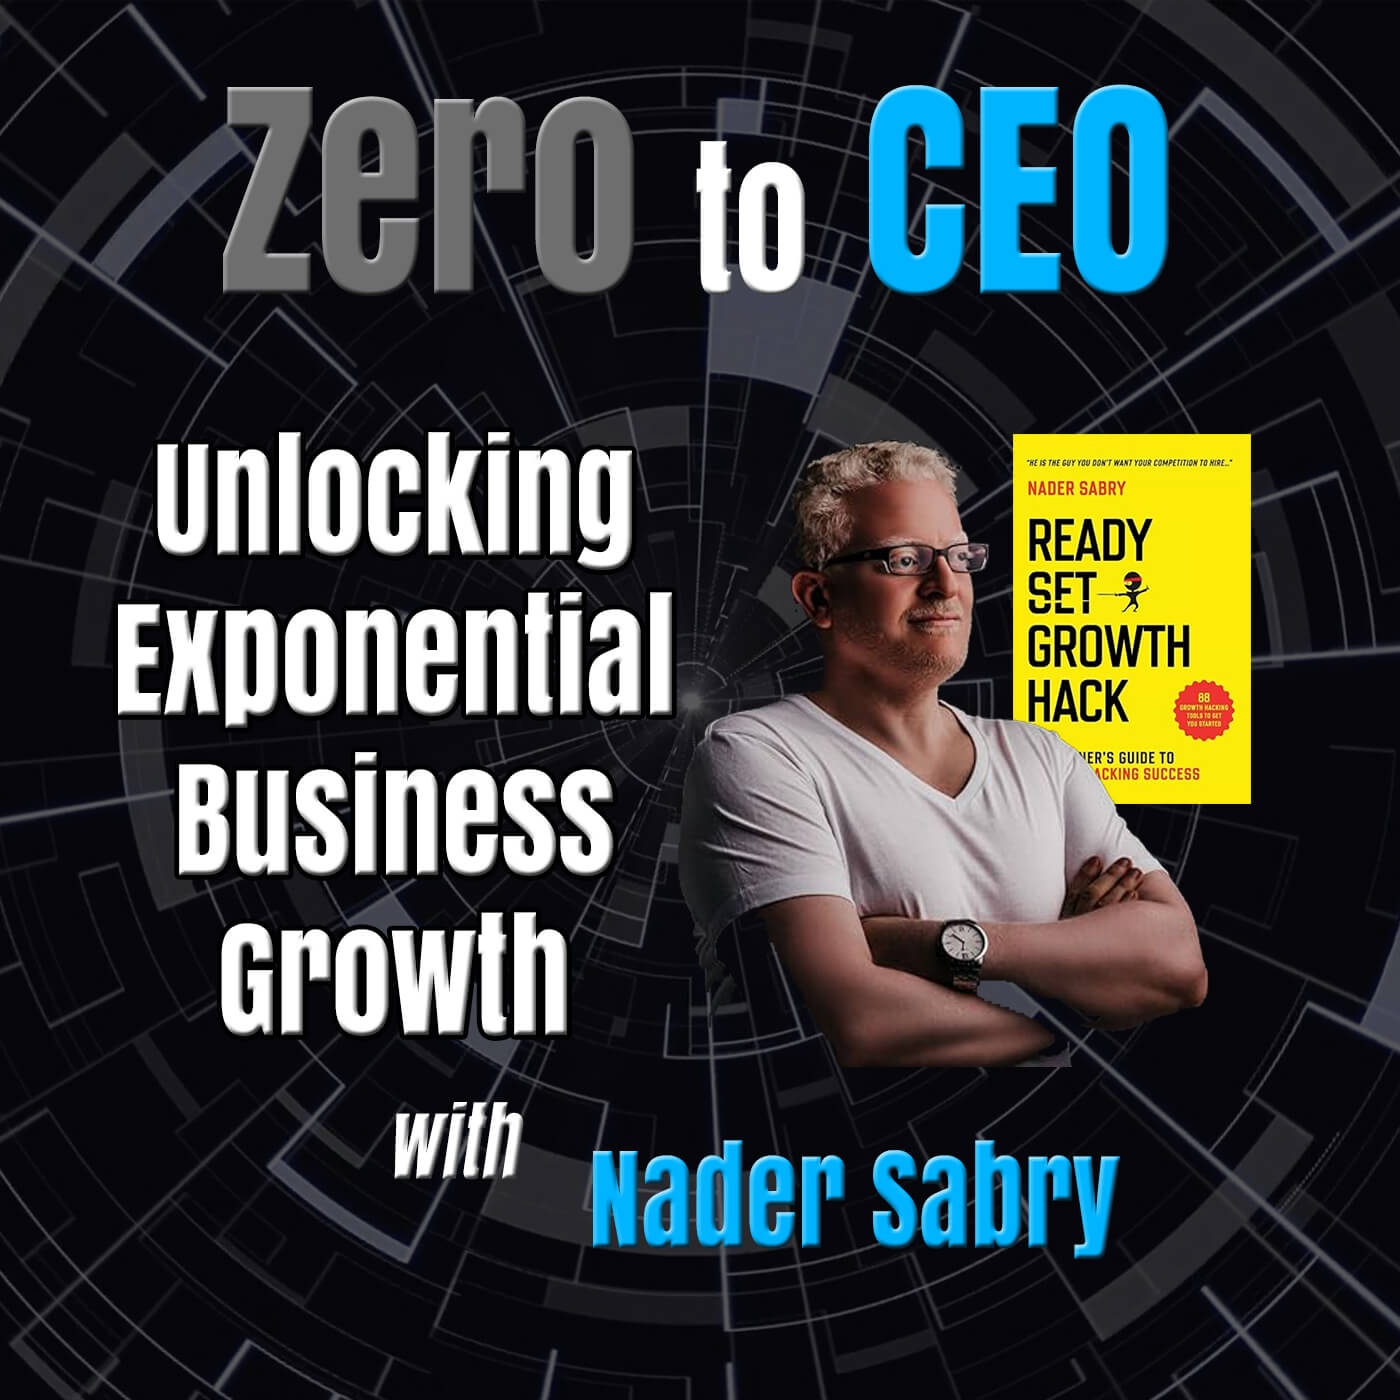 Zero to CEO: Unlocking Exponential Business Growth with Nader Sabry